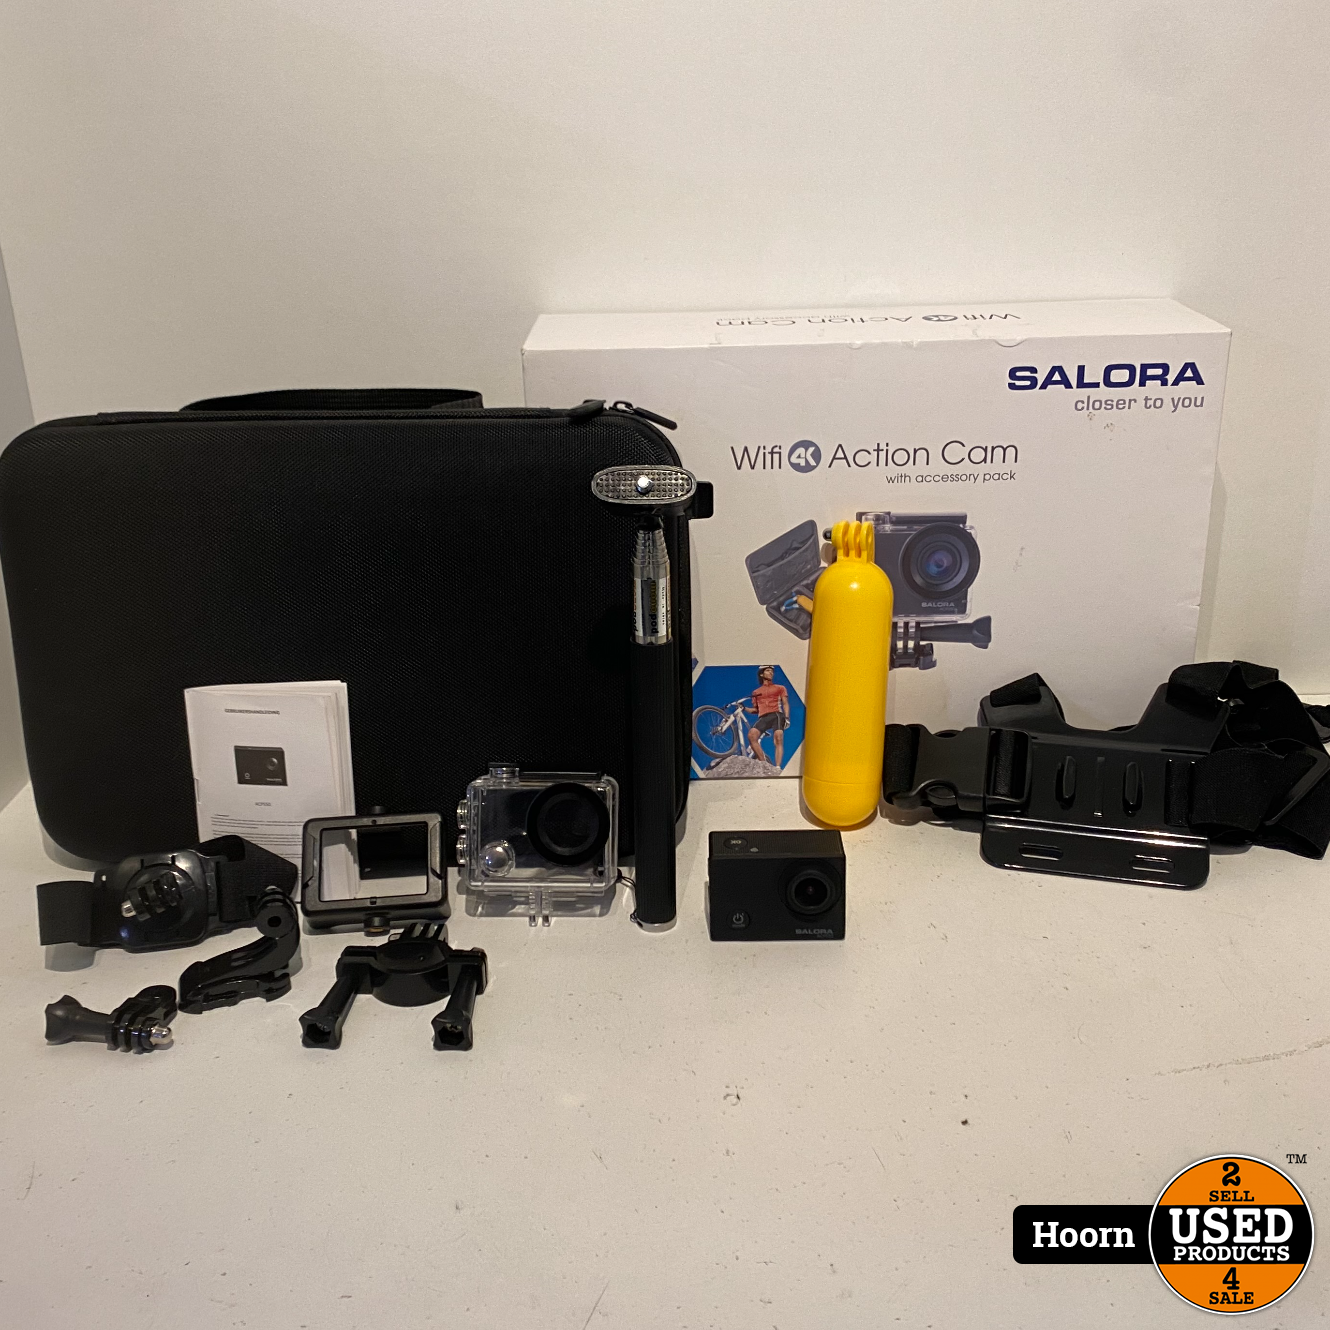 Salora ACP 550 WiFi 4K Action Cam Compleet incl. Accessoires - Used  Products Hoorn